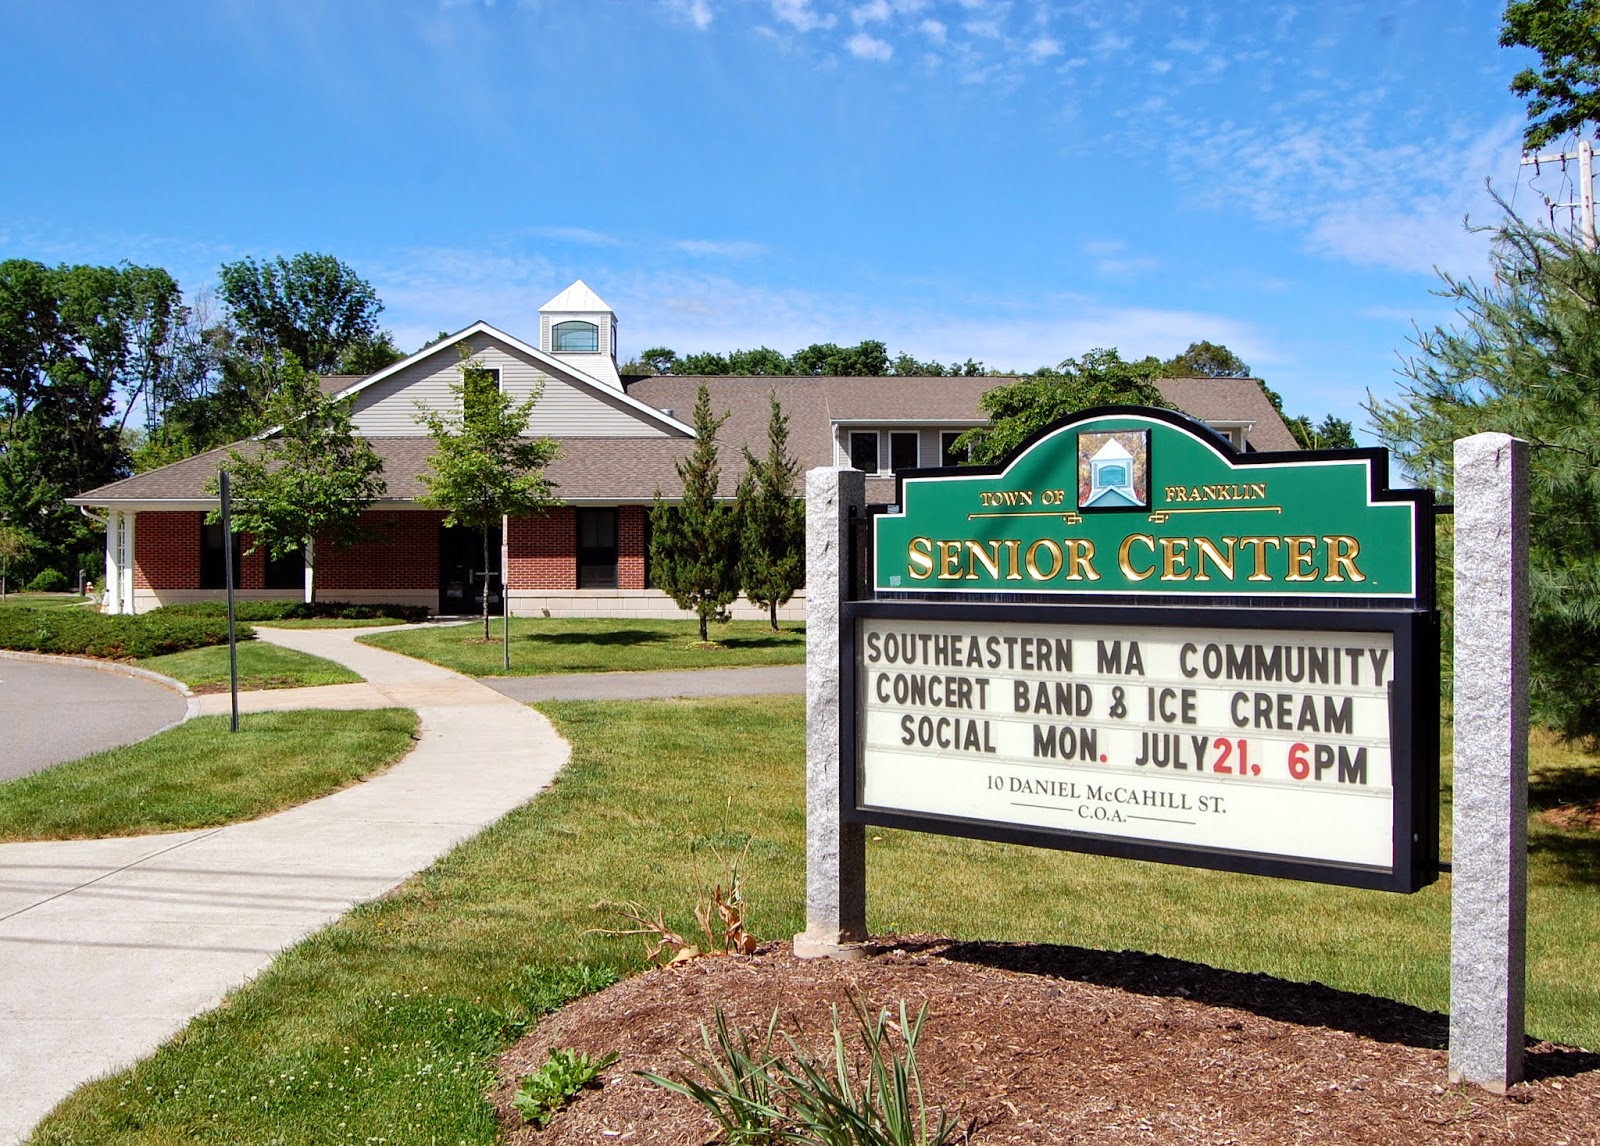 concert and ice cream social - July 21